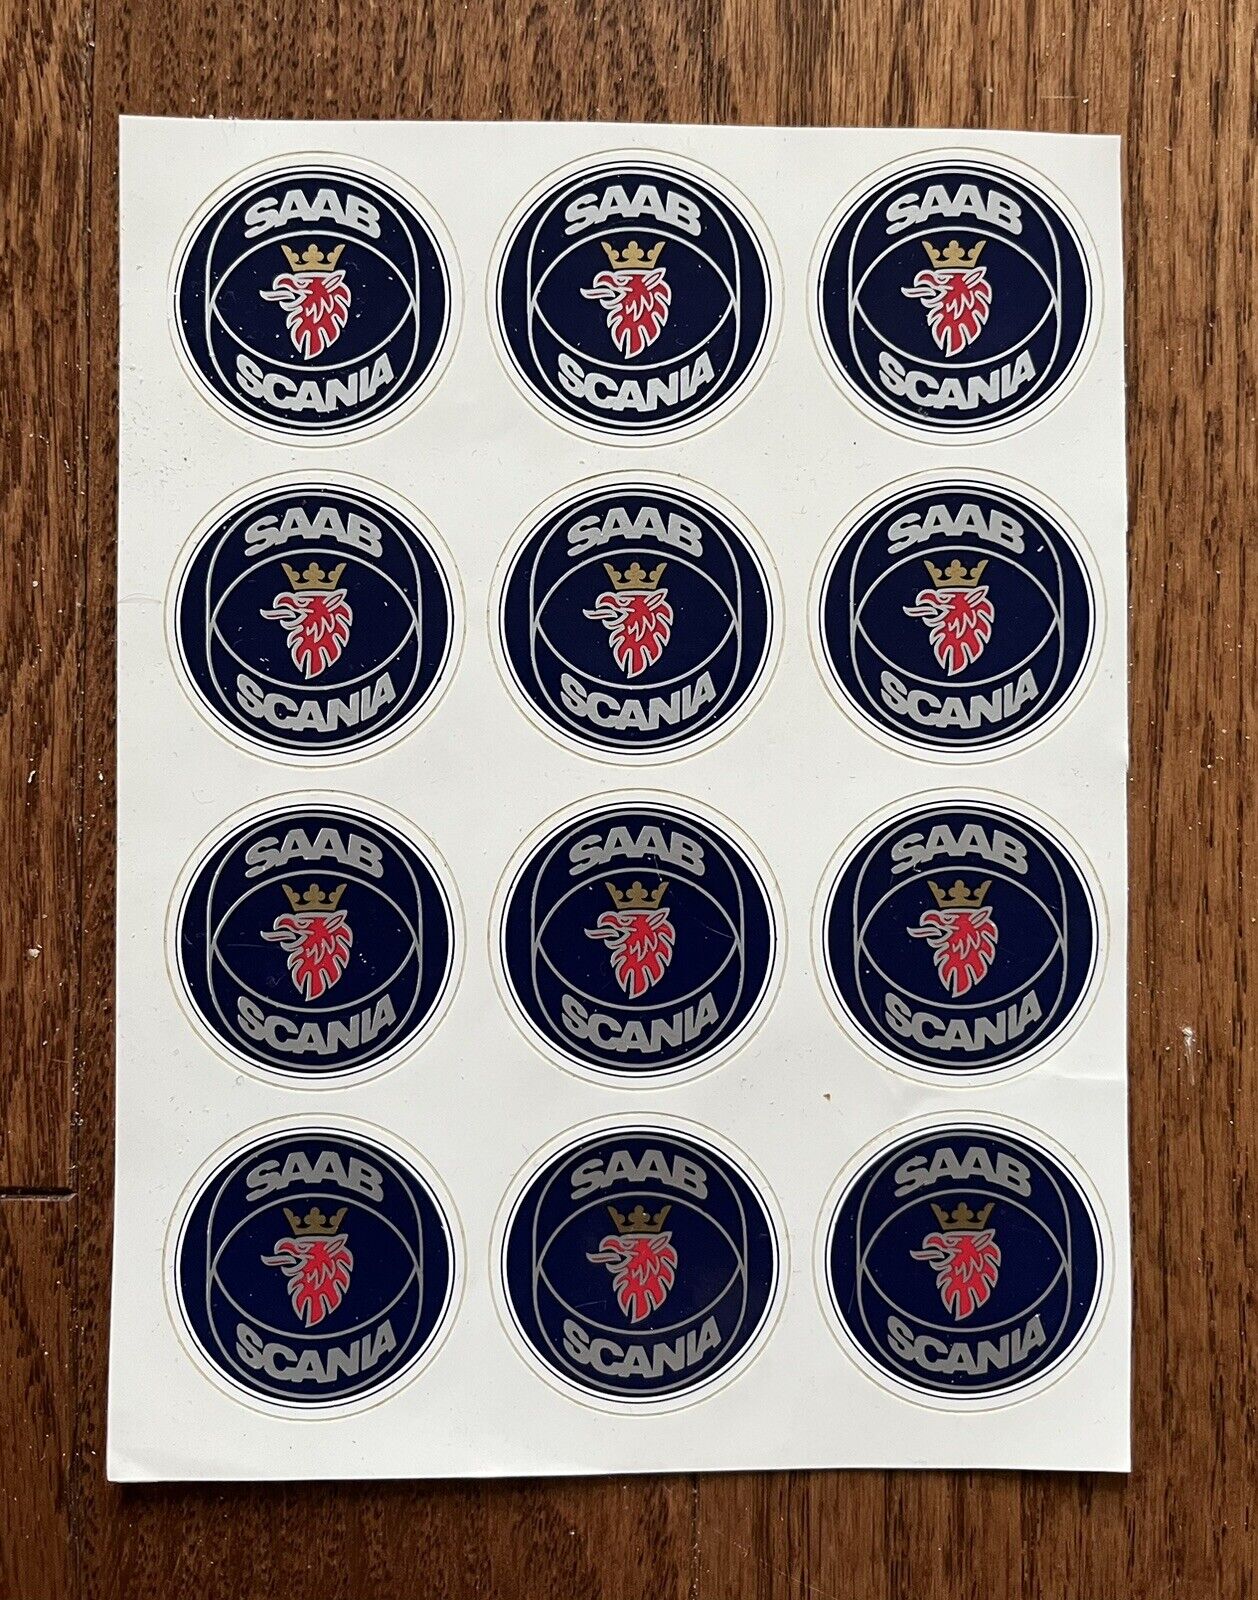 Vintage SAAB SCANIA Stickers Decals - 1.5” - Sheet of 12